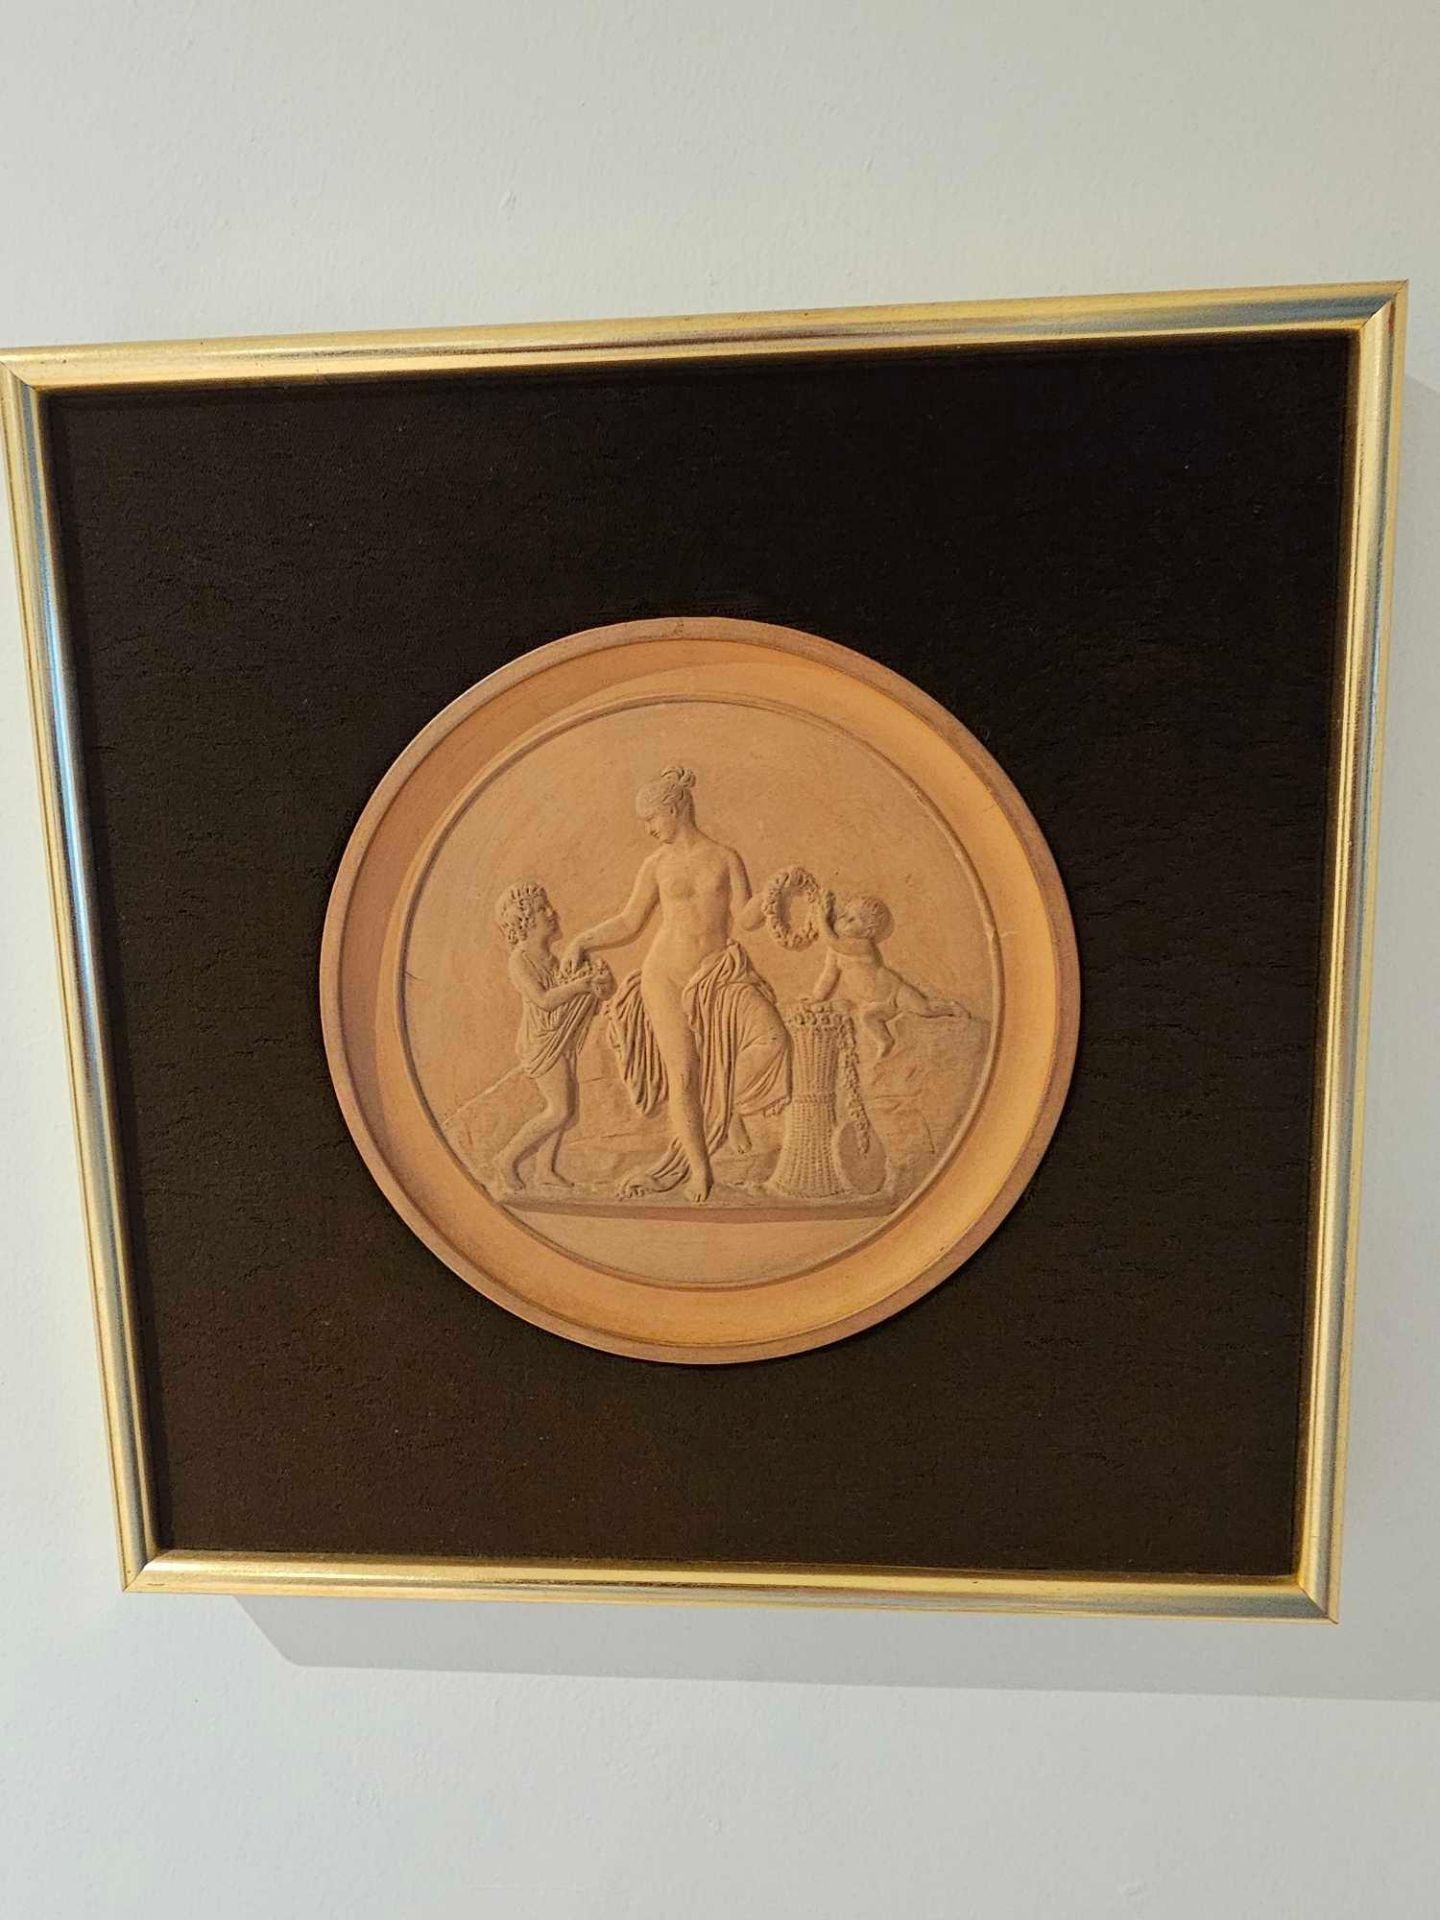 Victorian Red Earthenware Roundels Cast In Relief With Allegorical Scenes Depicting "The Ages Of - Image 2 of 2